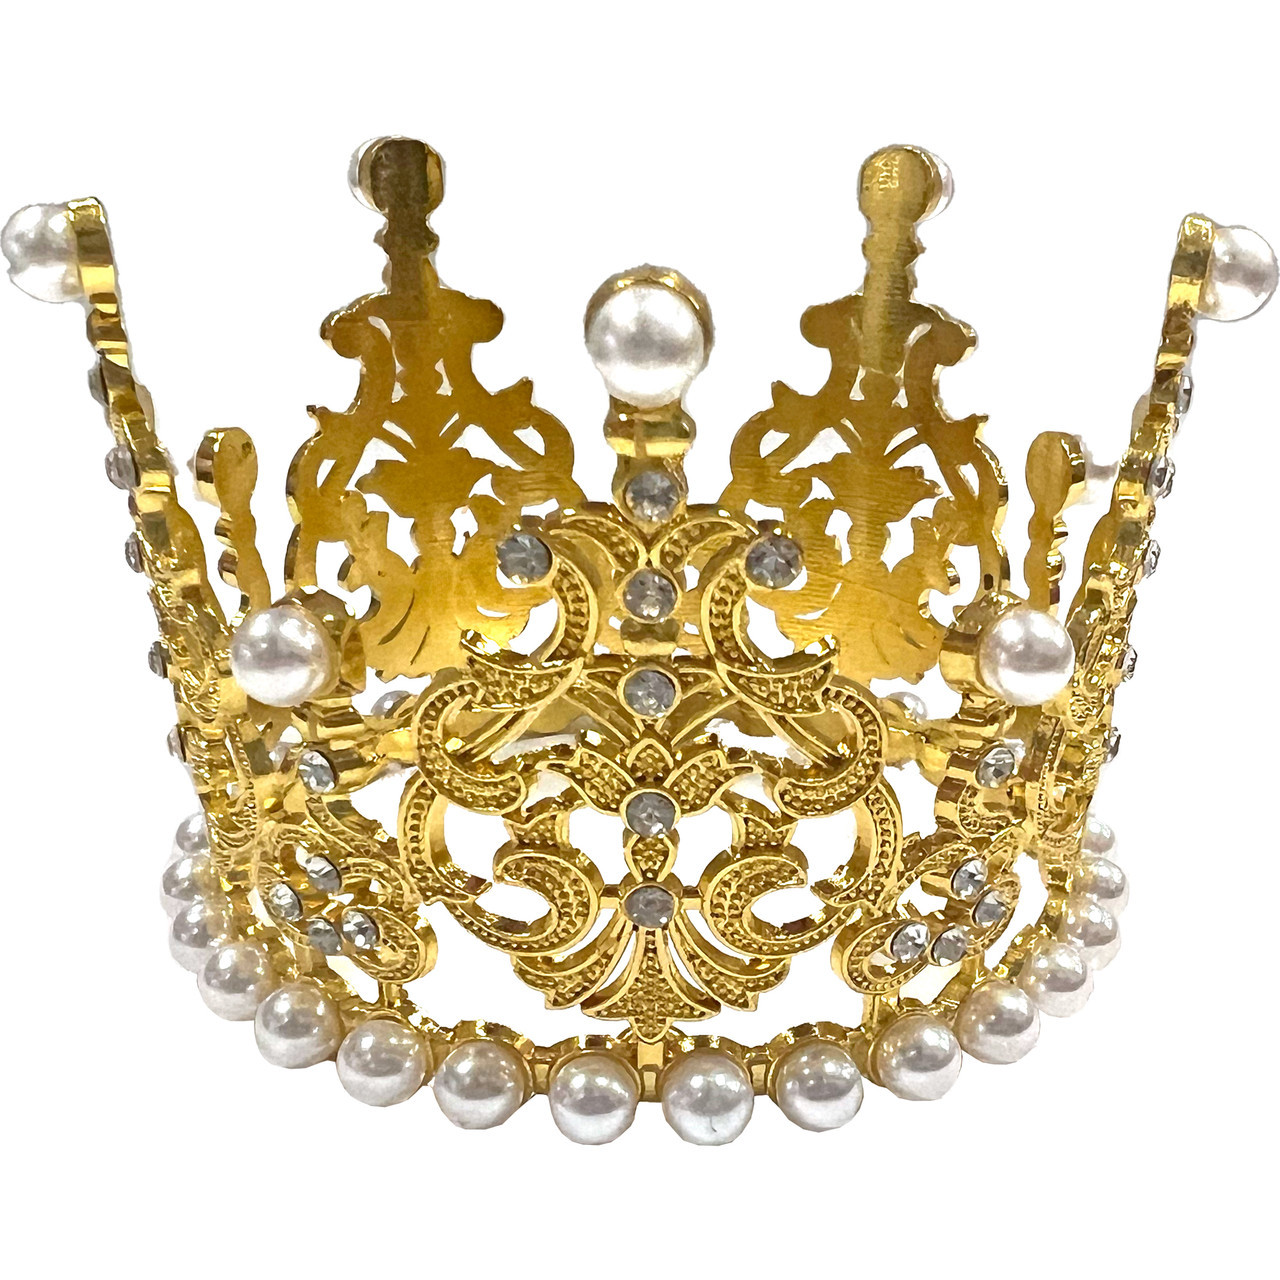 3 Gold Rhinestones Crown with Pearls - LO Florist Supplies